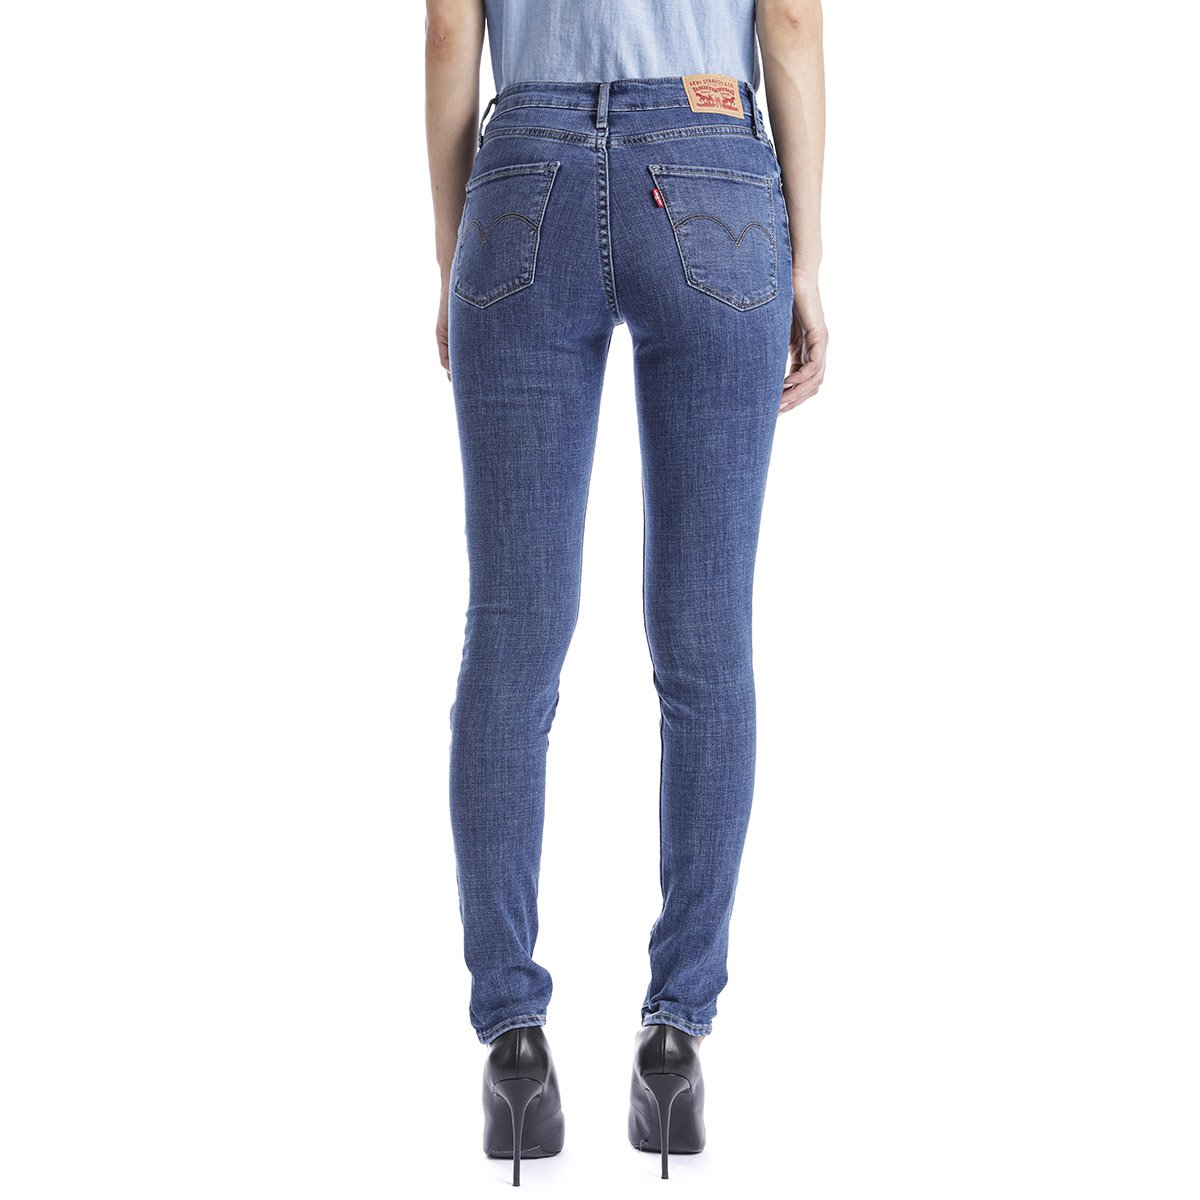 Jeans   721 High Rise Skinny  Levis